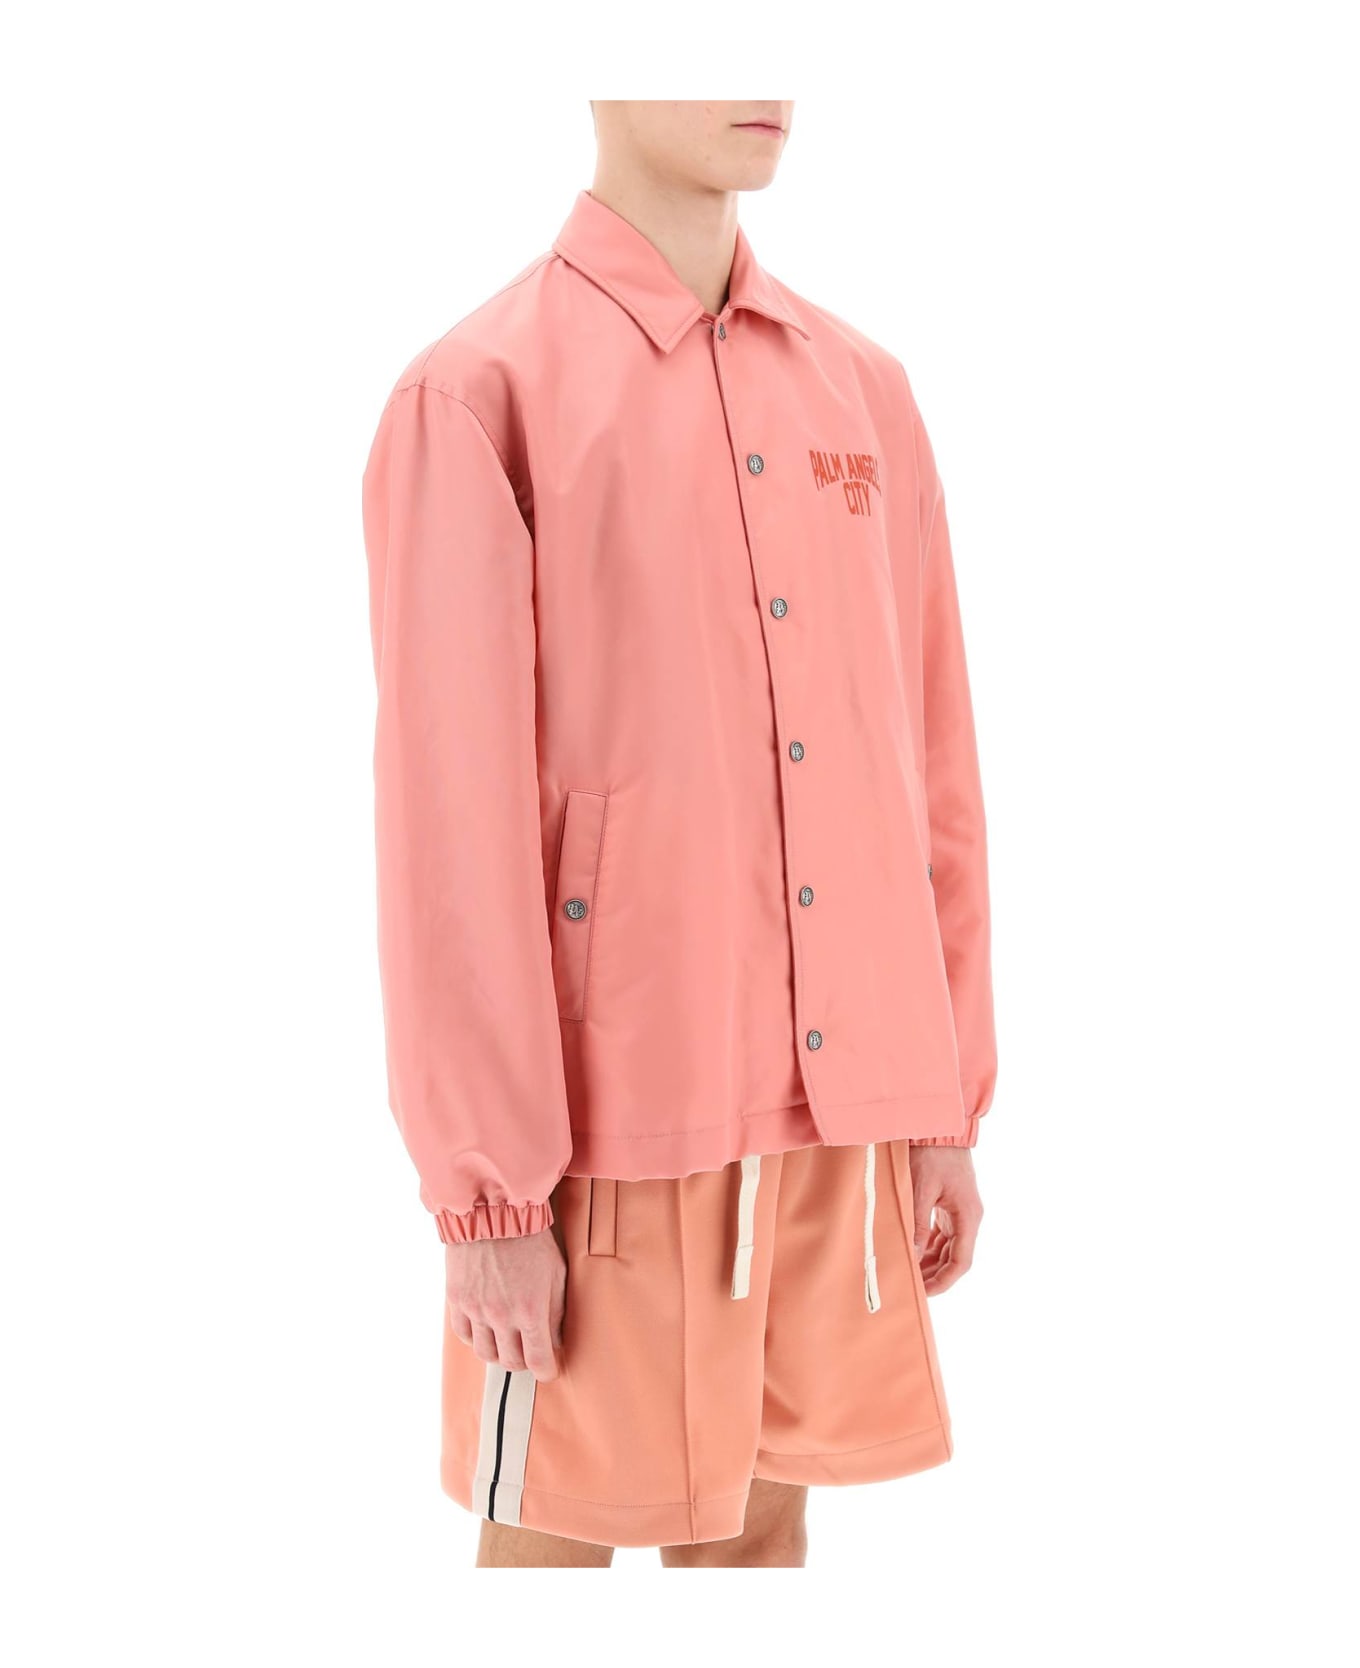 Palm Angels Pa City Coach Jacket - PINK RED (Pink) ジャケット